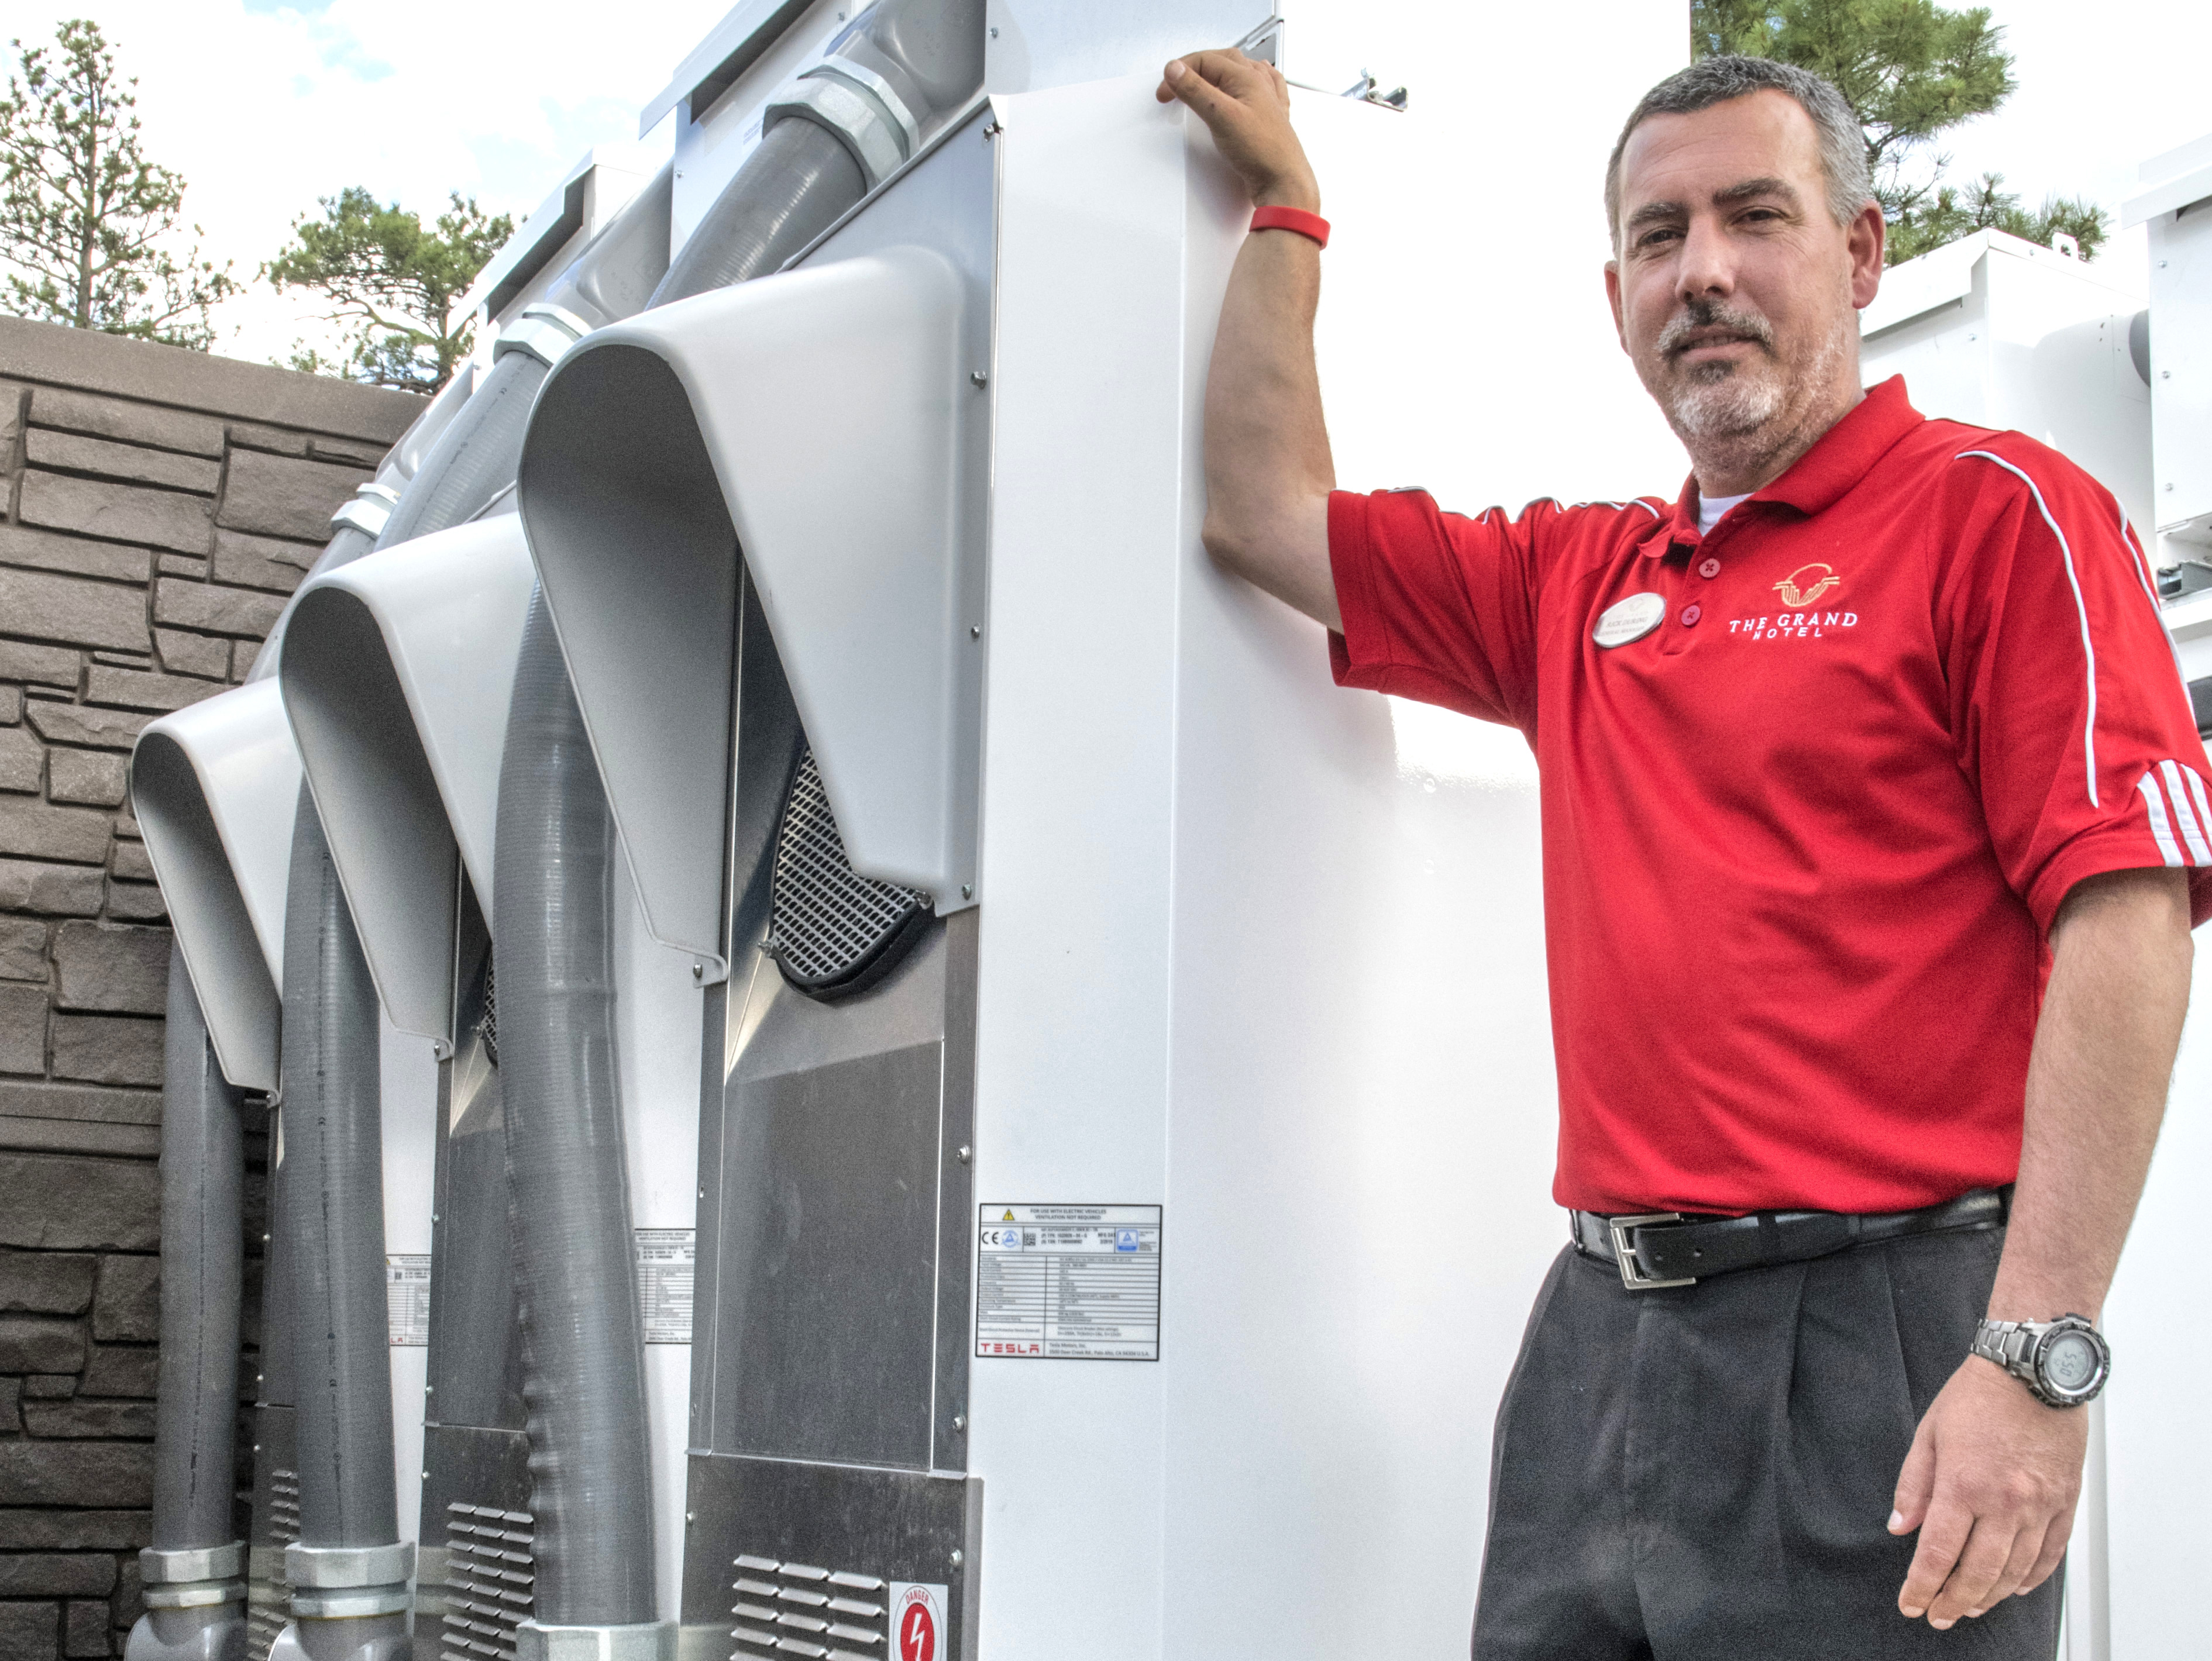 Supercharger Station Opens In Tusayan Williams Grand Canyon News Williams Grand Canyon Az